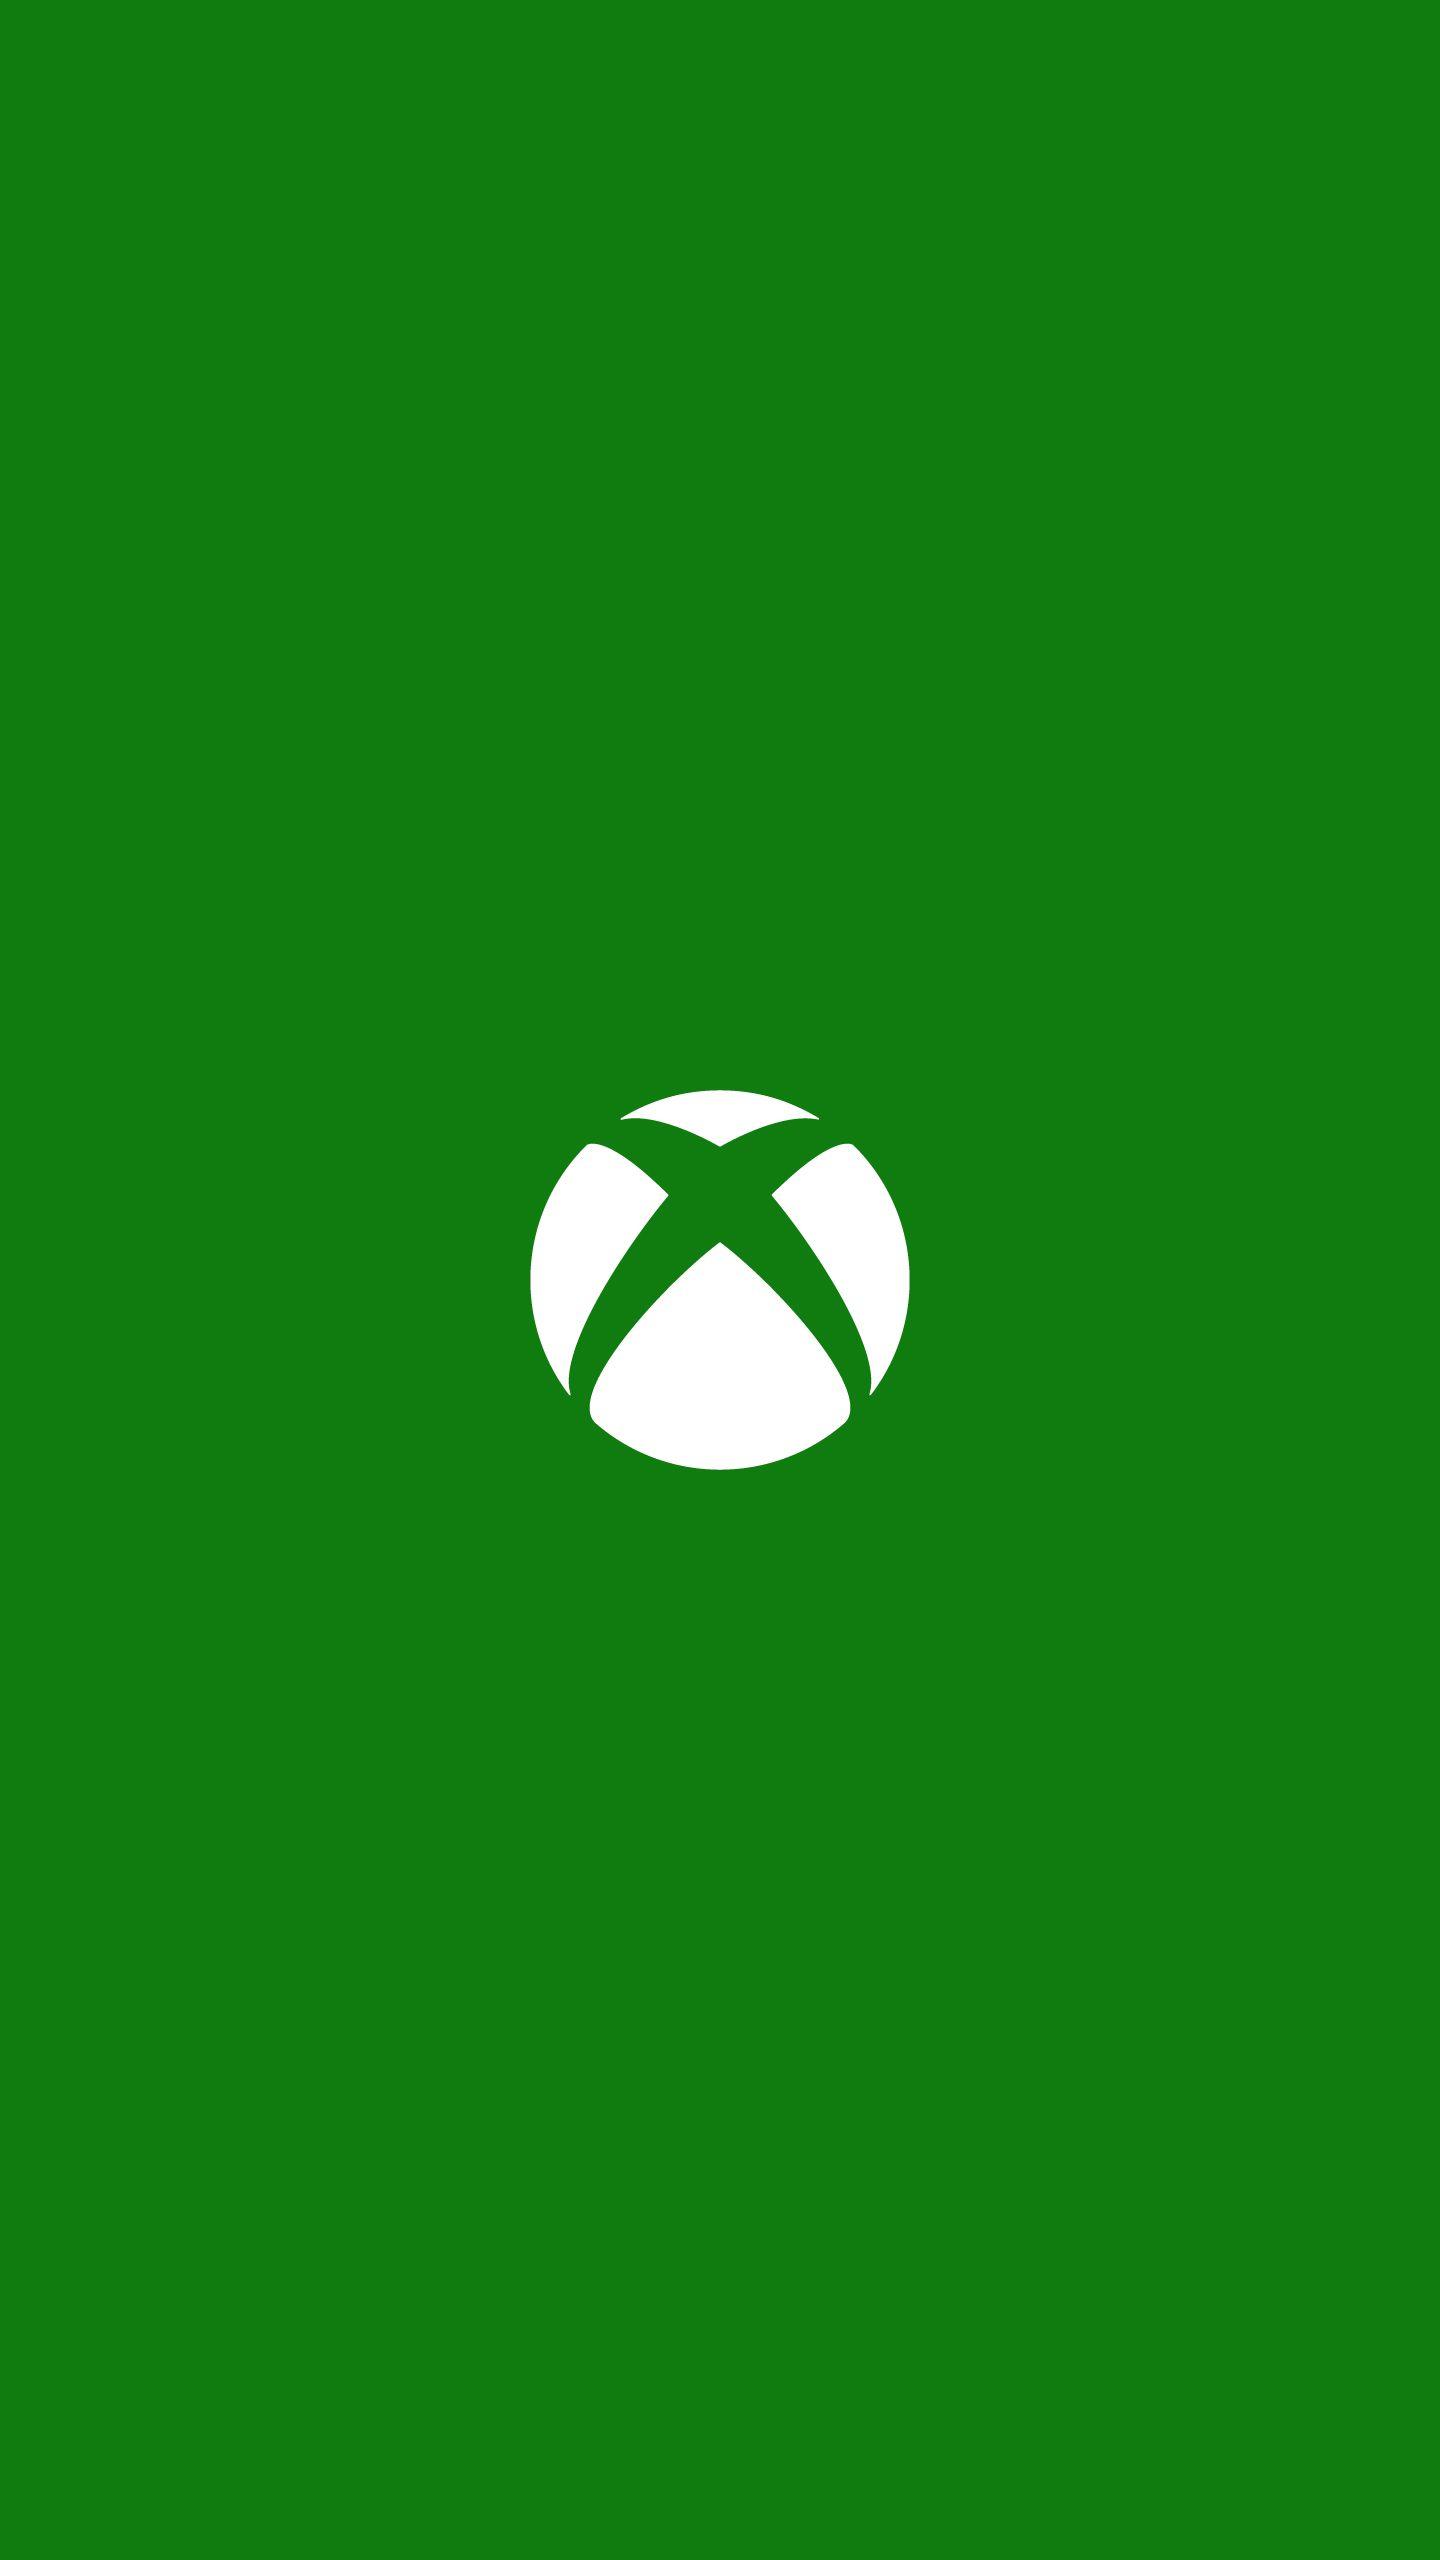 Xbox One Wallpaper in Profile Color Options